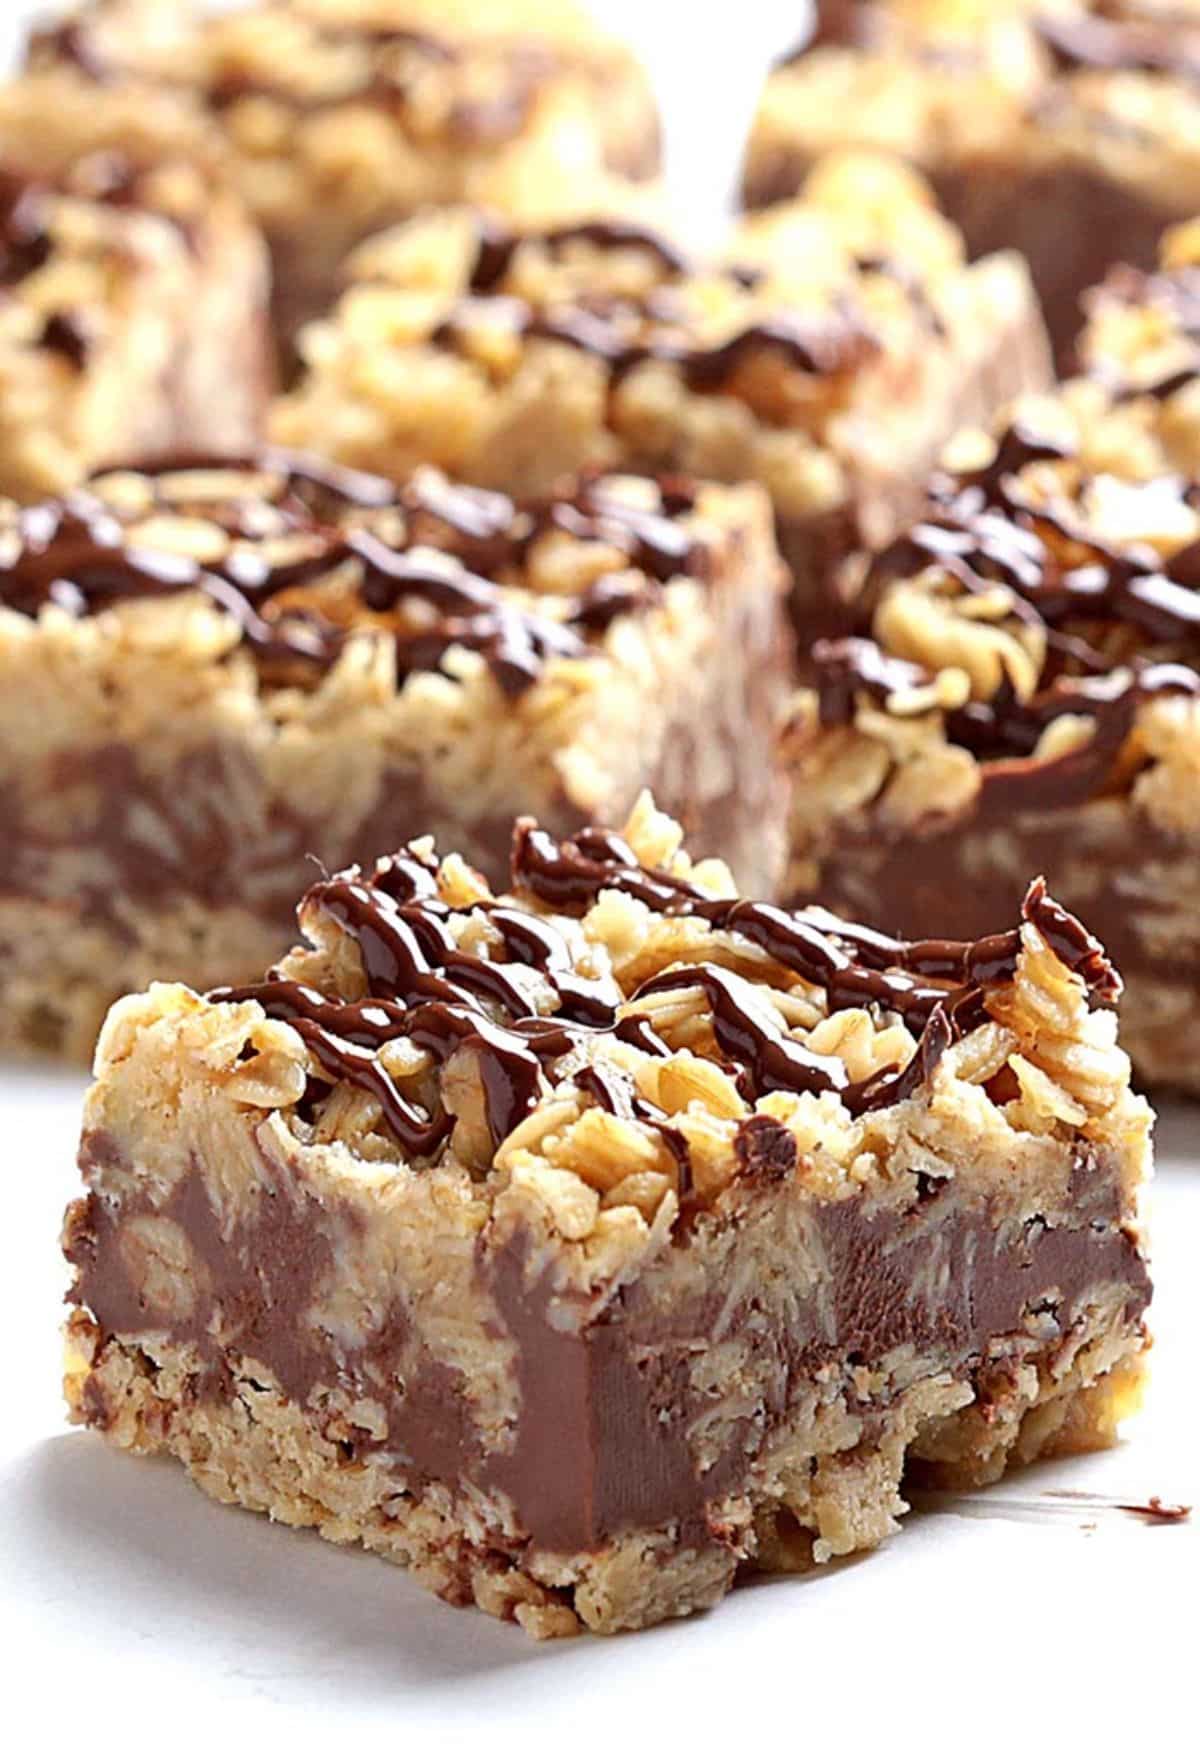 Mouth-watering no-bake chocolate oatmeal bars on a tray.